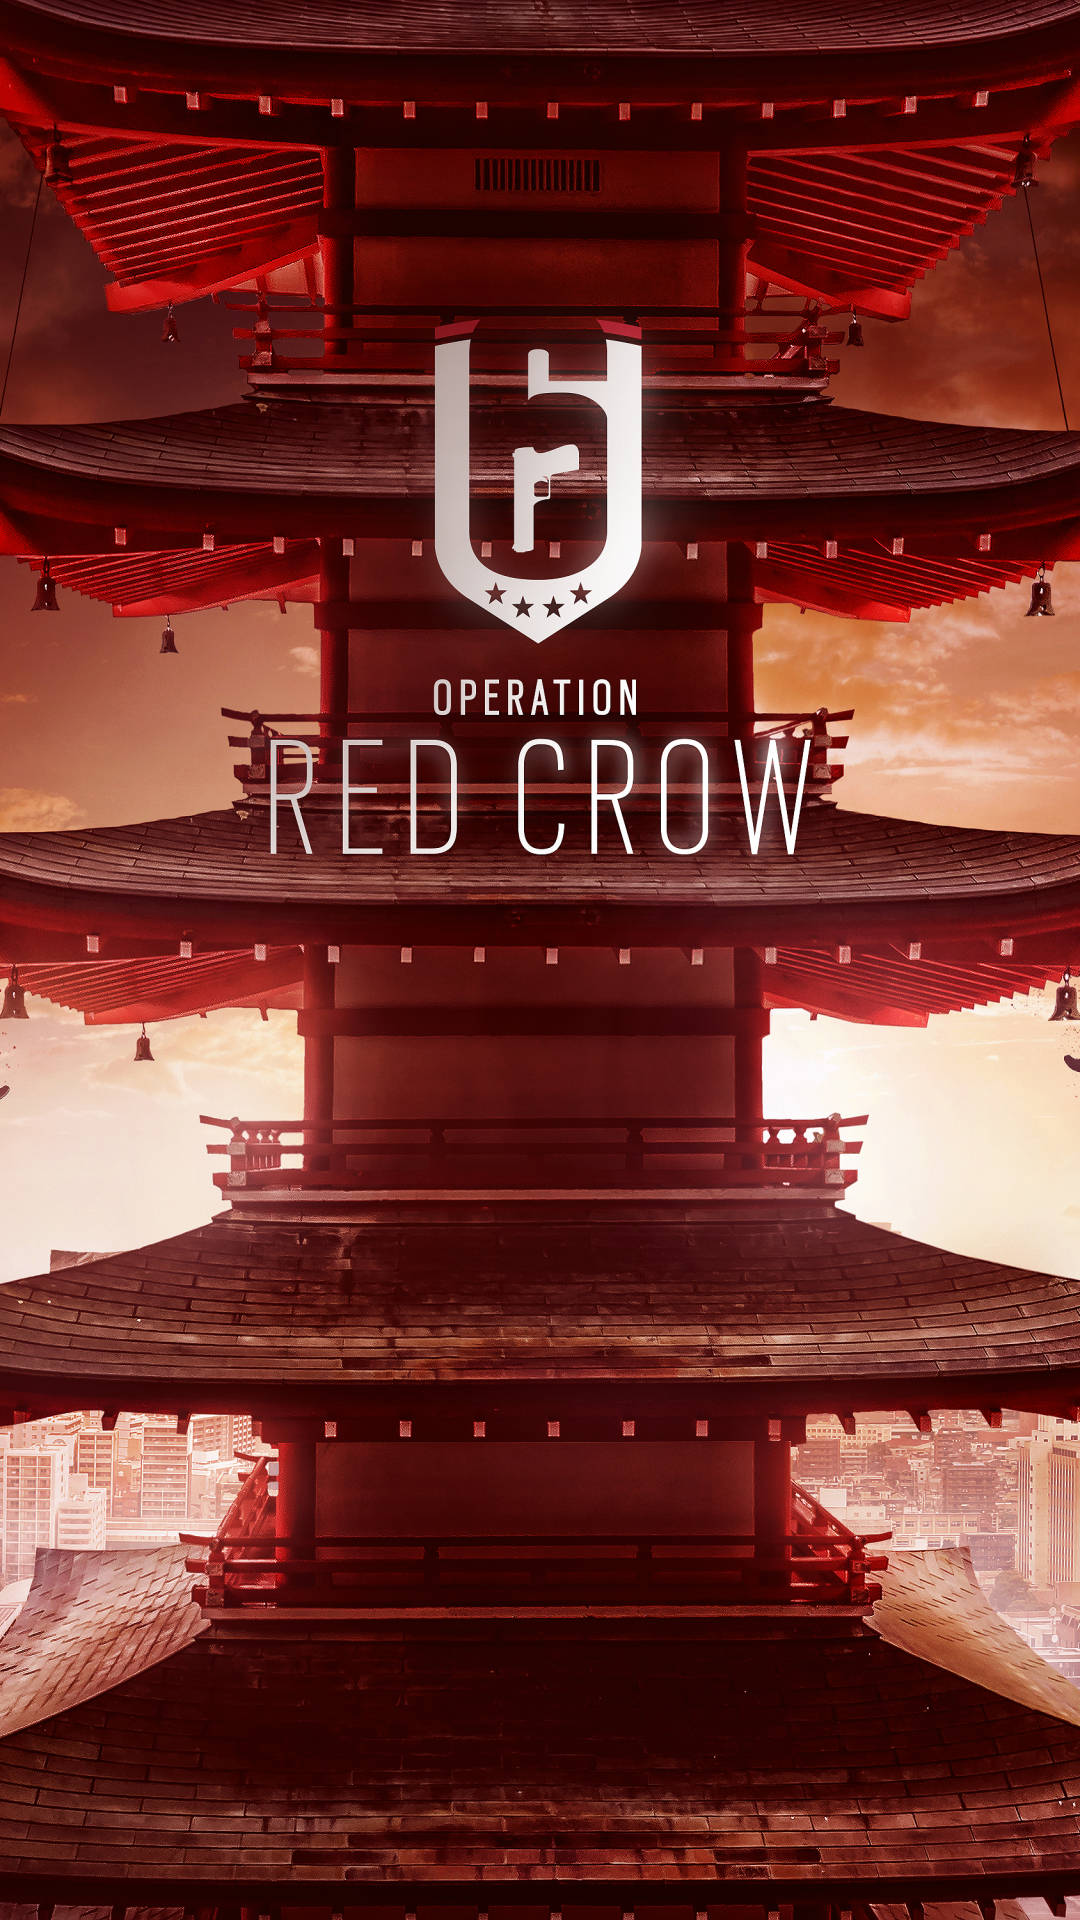 Rainbow Six Belagerung Operation Red Crown Iphone Wallpaper